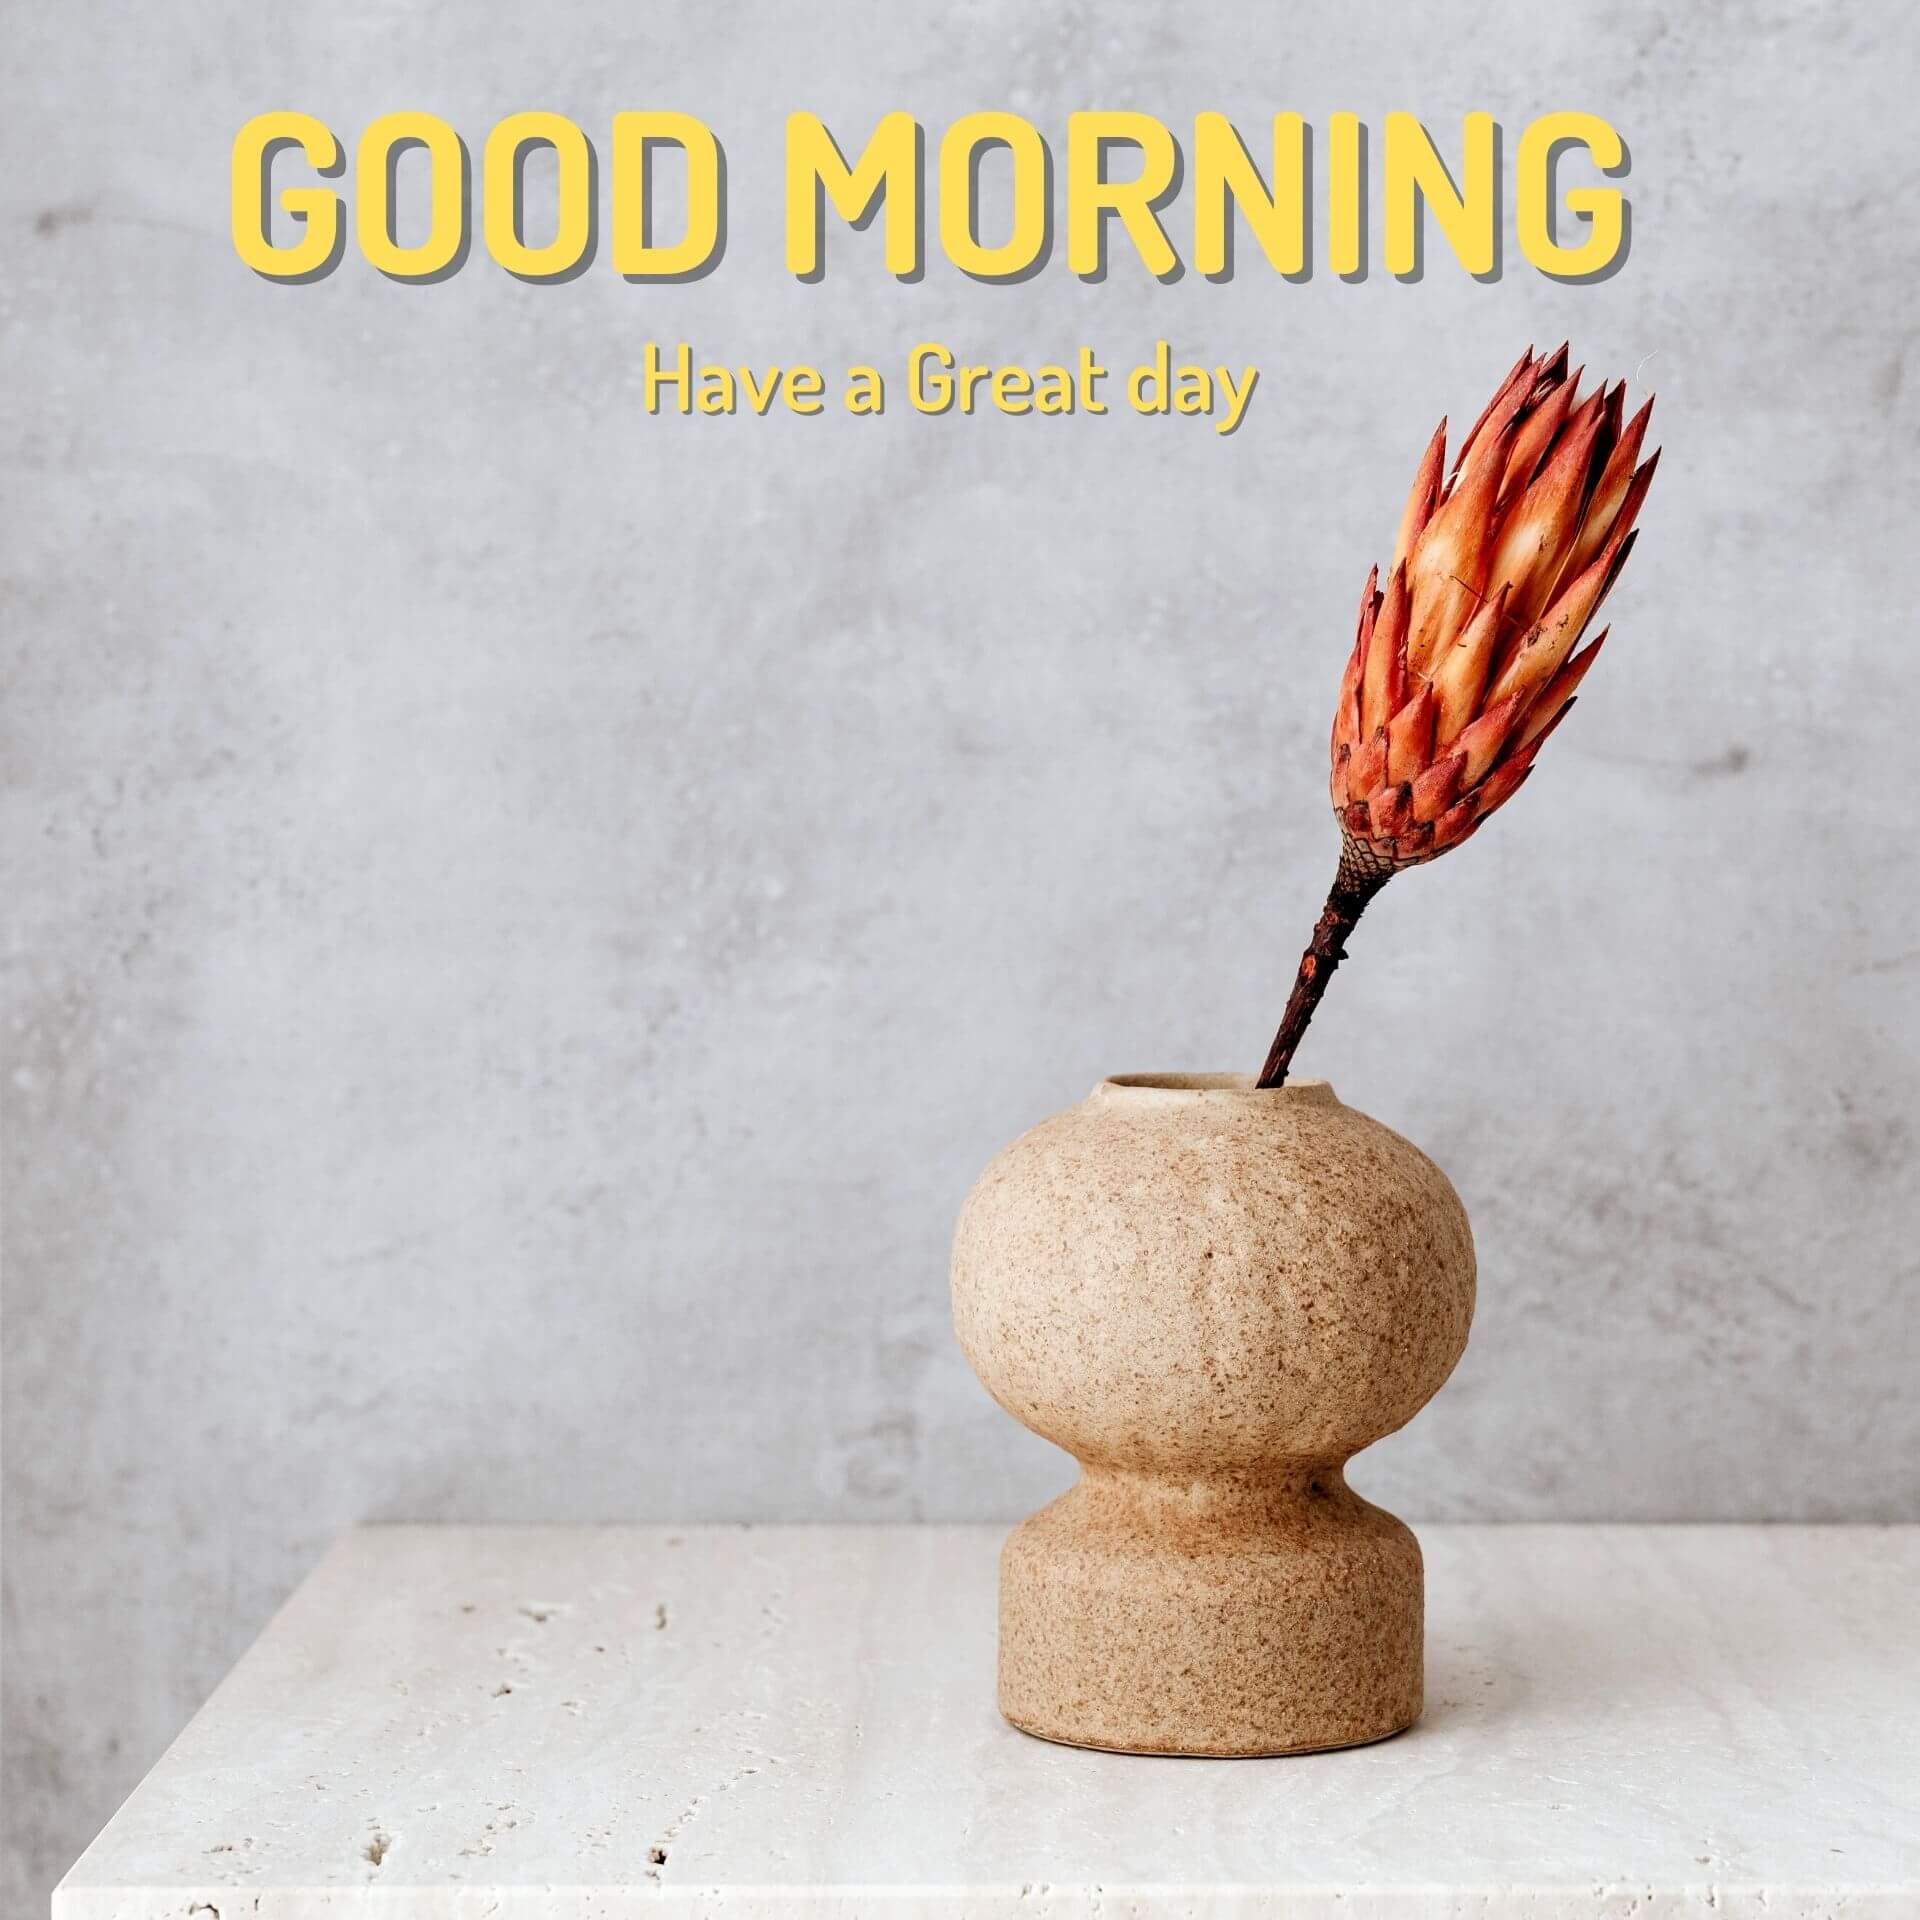 Good morning have a nice day Wallpaper New Download 2023